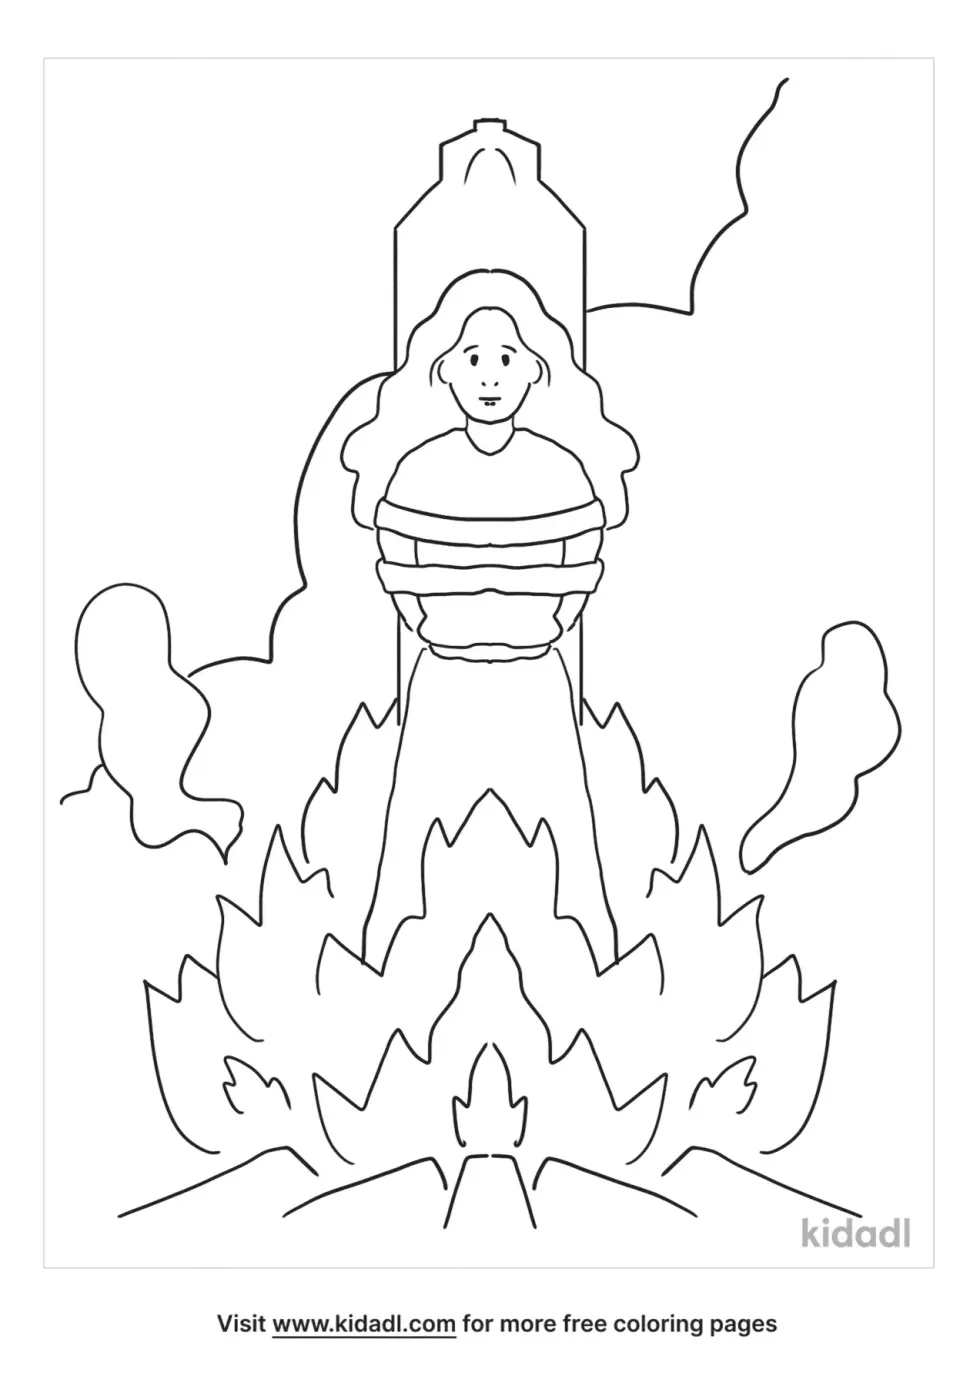 Burned At The Stake Coloring Page